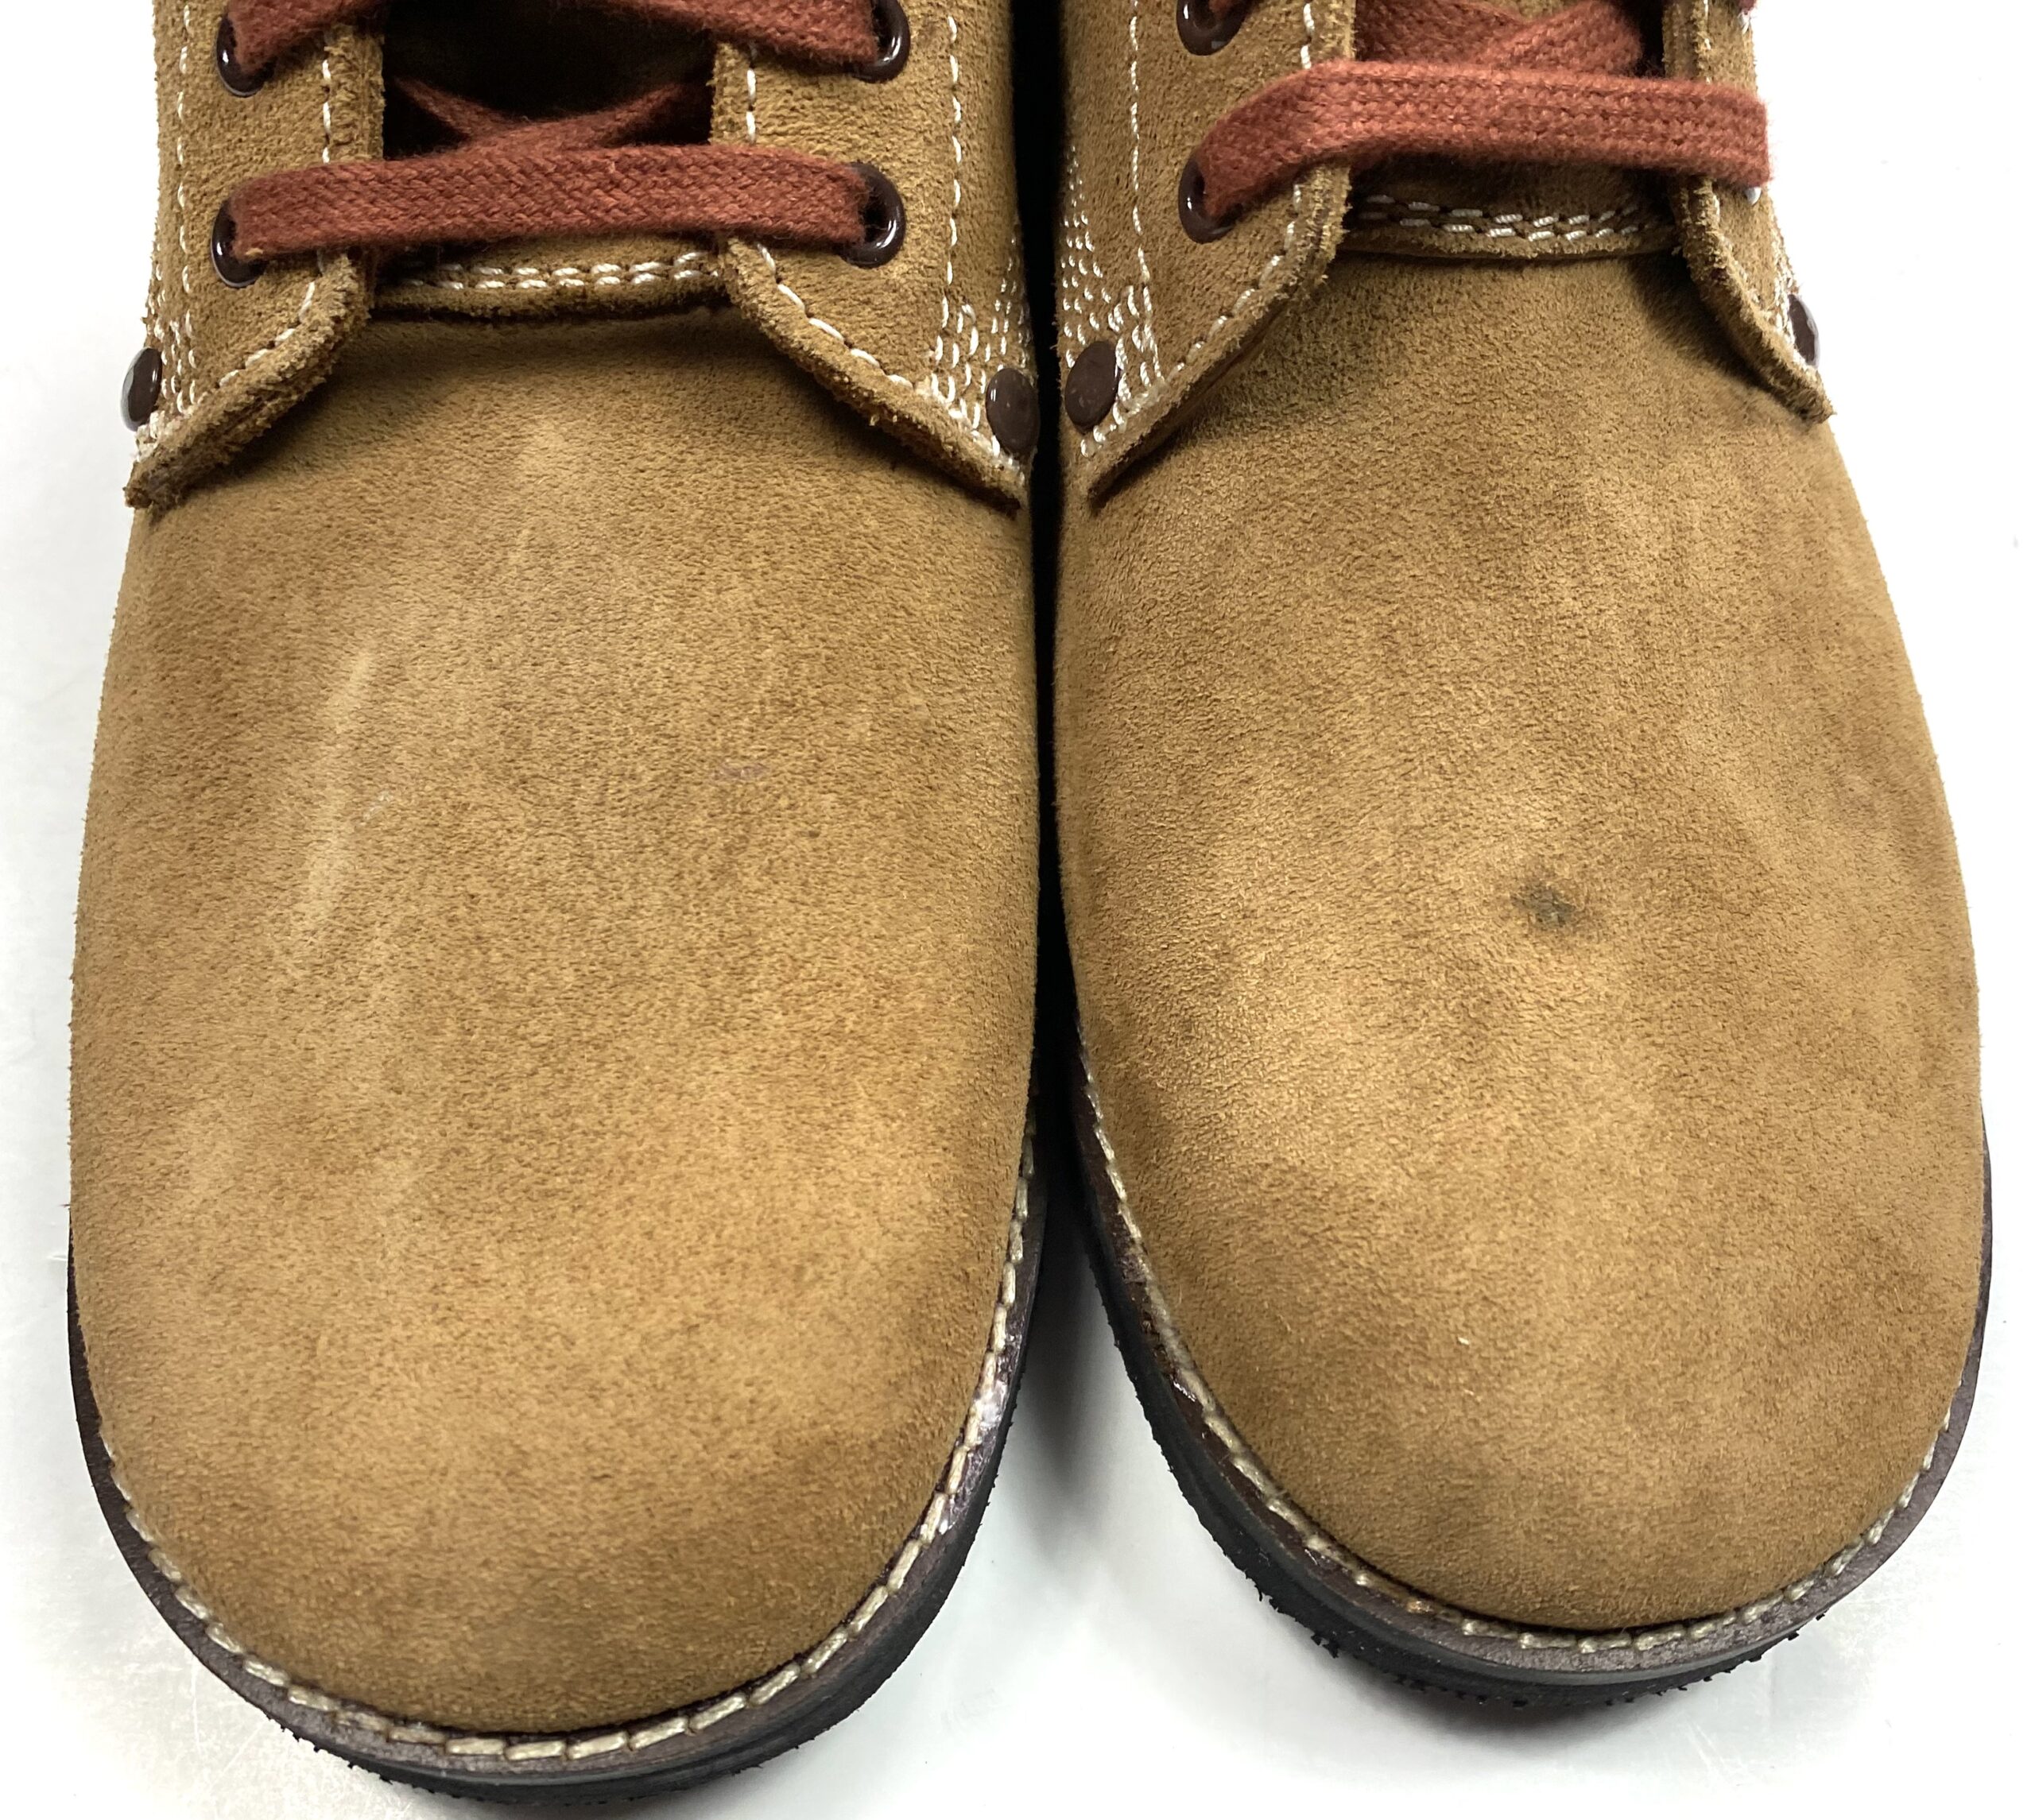 RUSSETS TYPE III “ROUGHT OUTS” COMBAT FIELD BOOTS | Man The Line